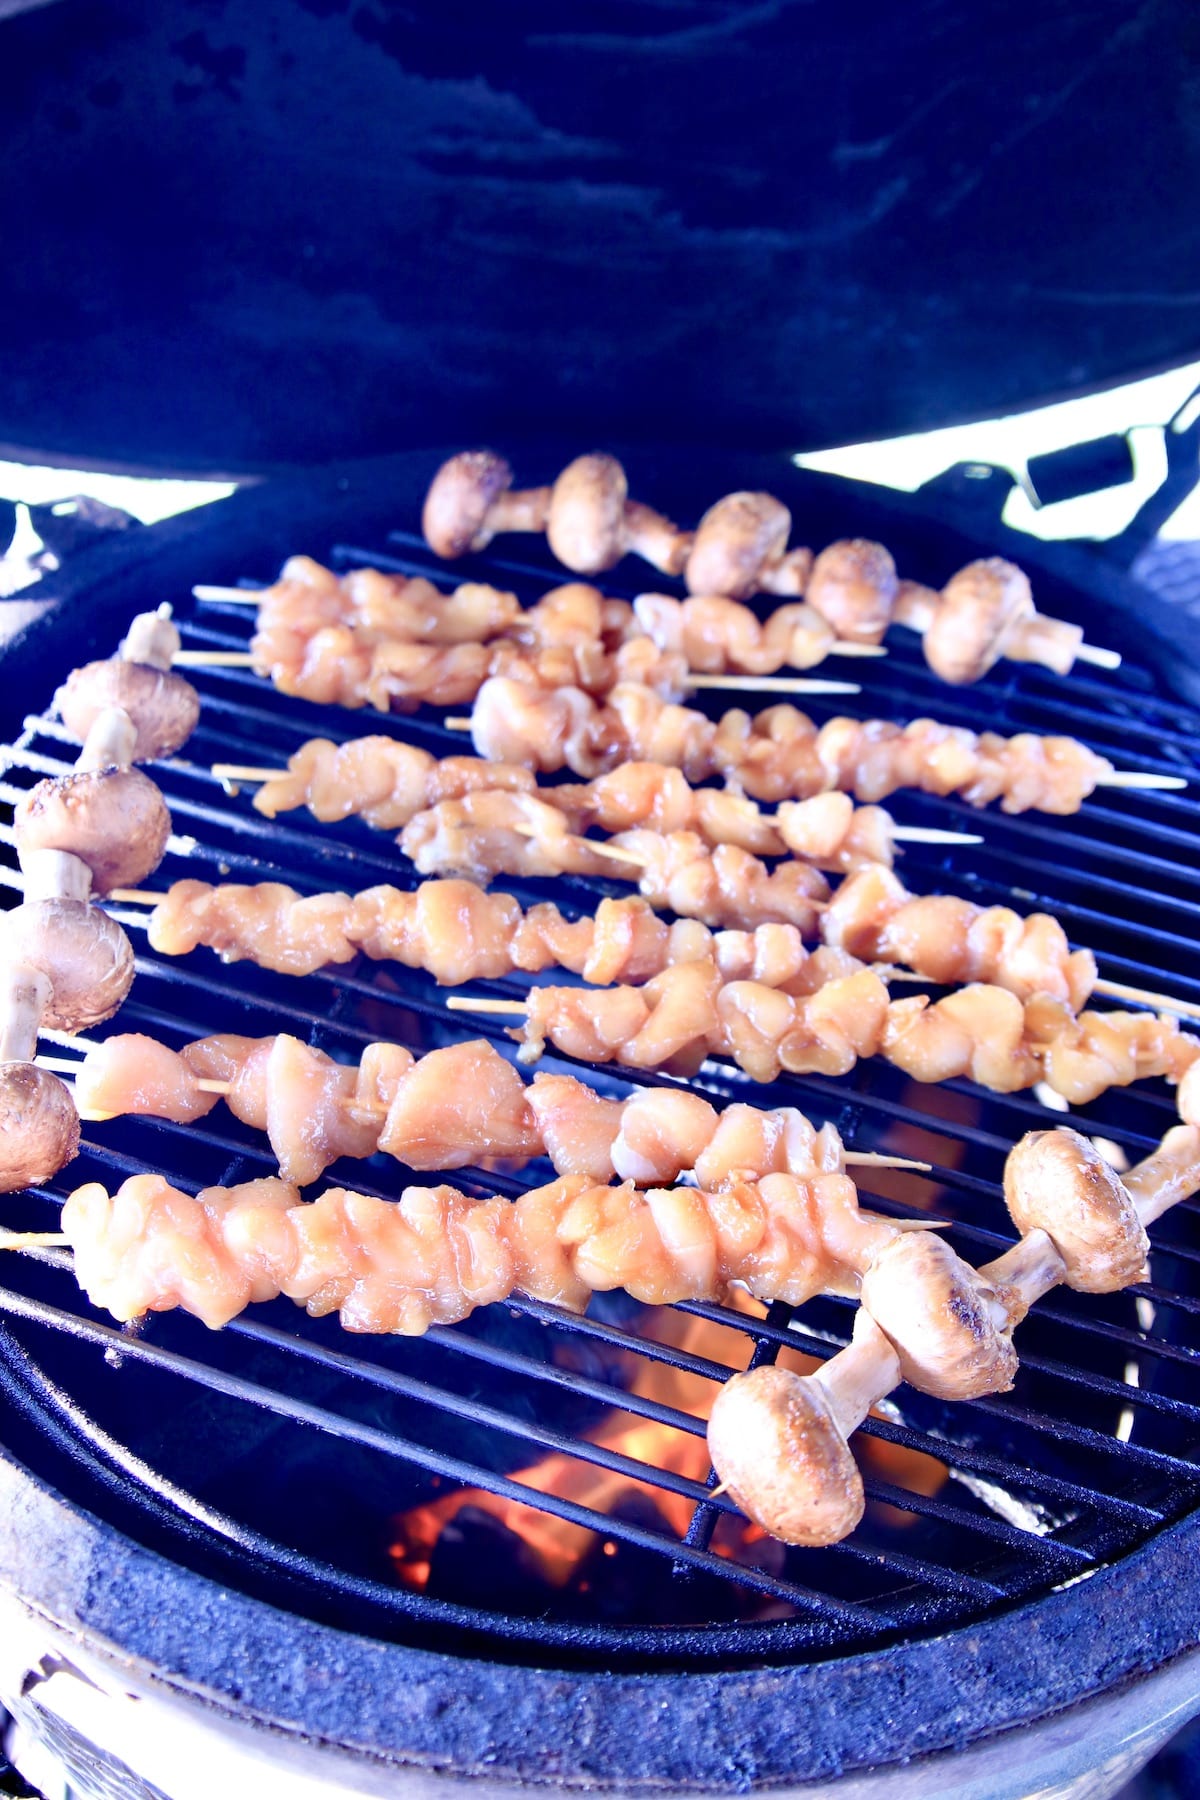 Chicken skewers on a grill.